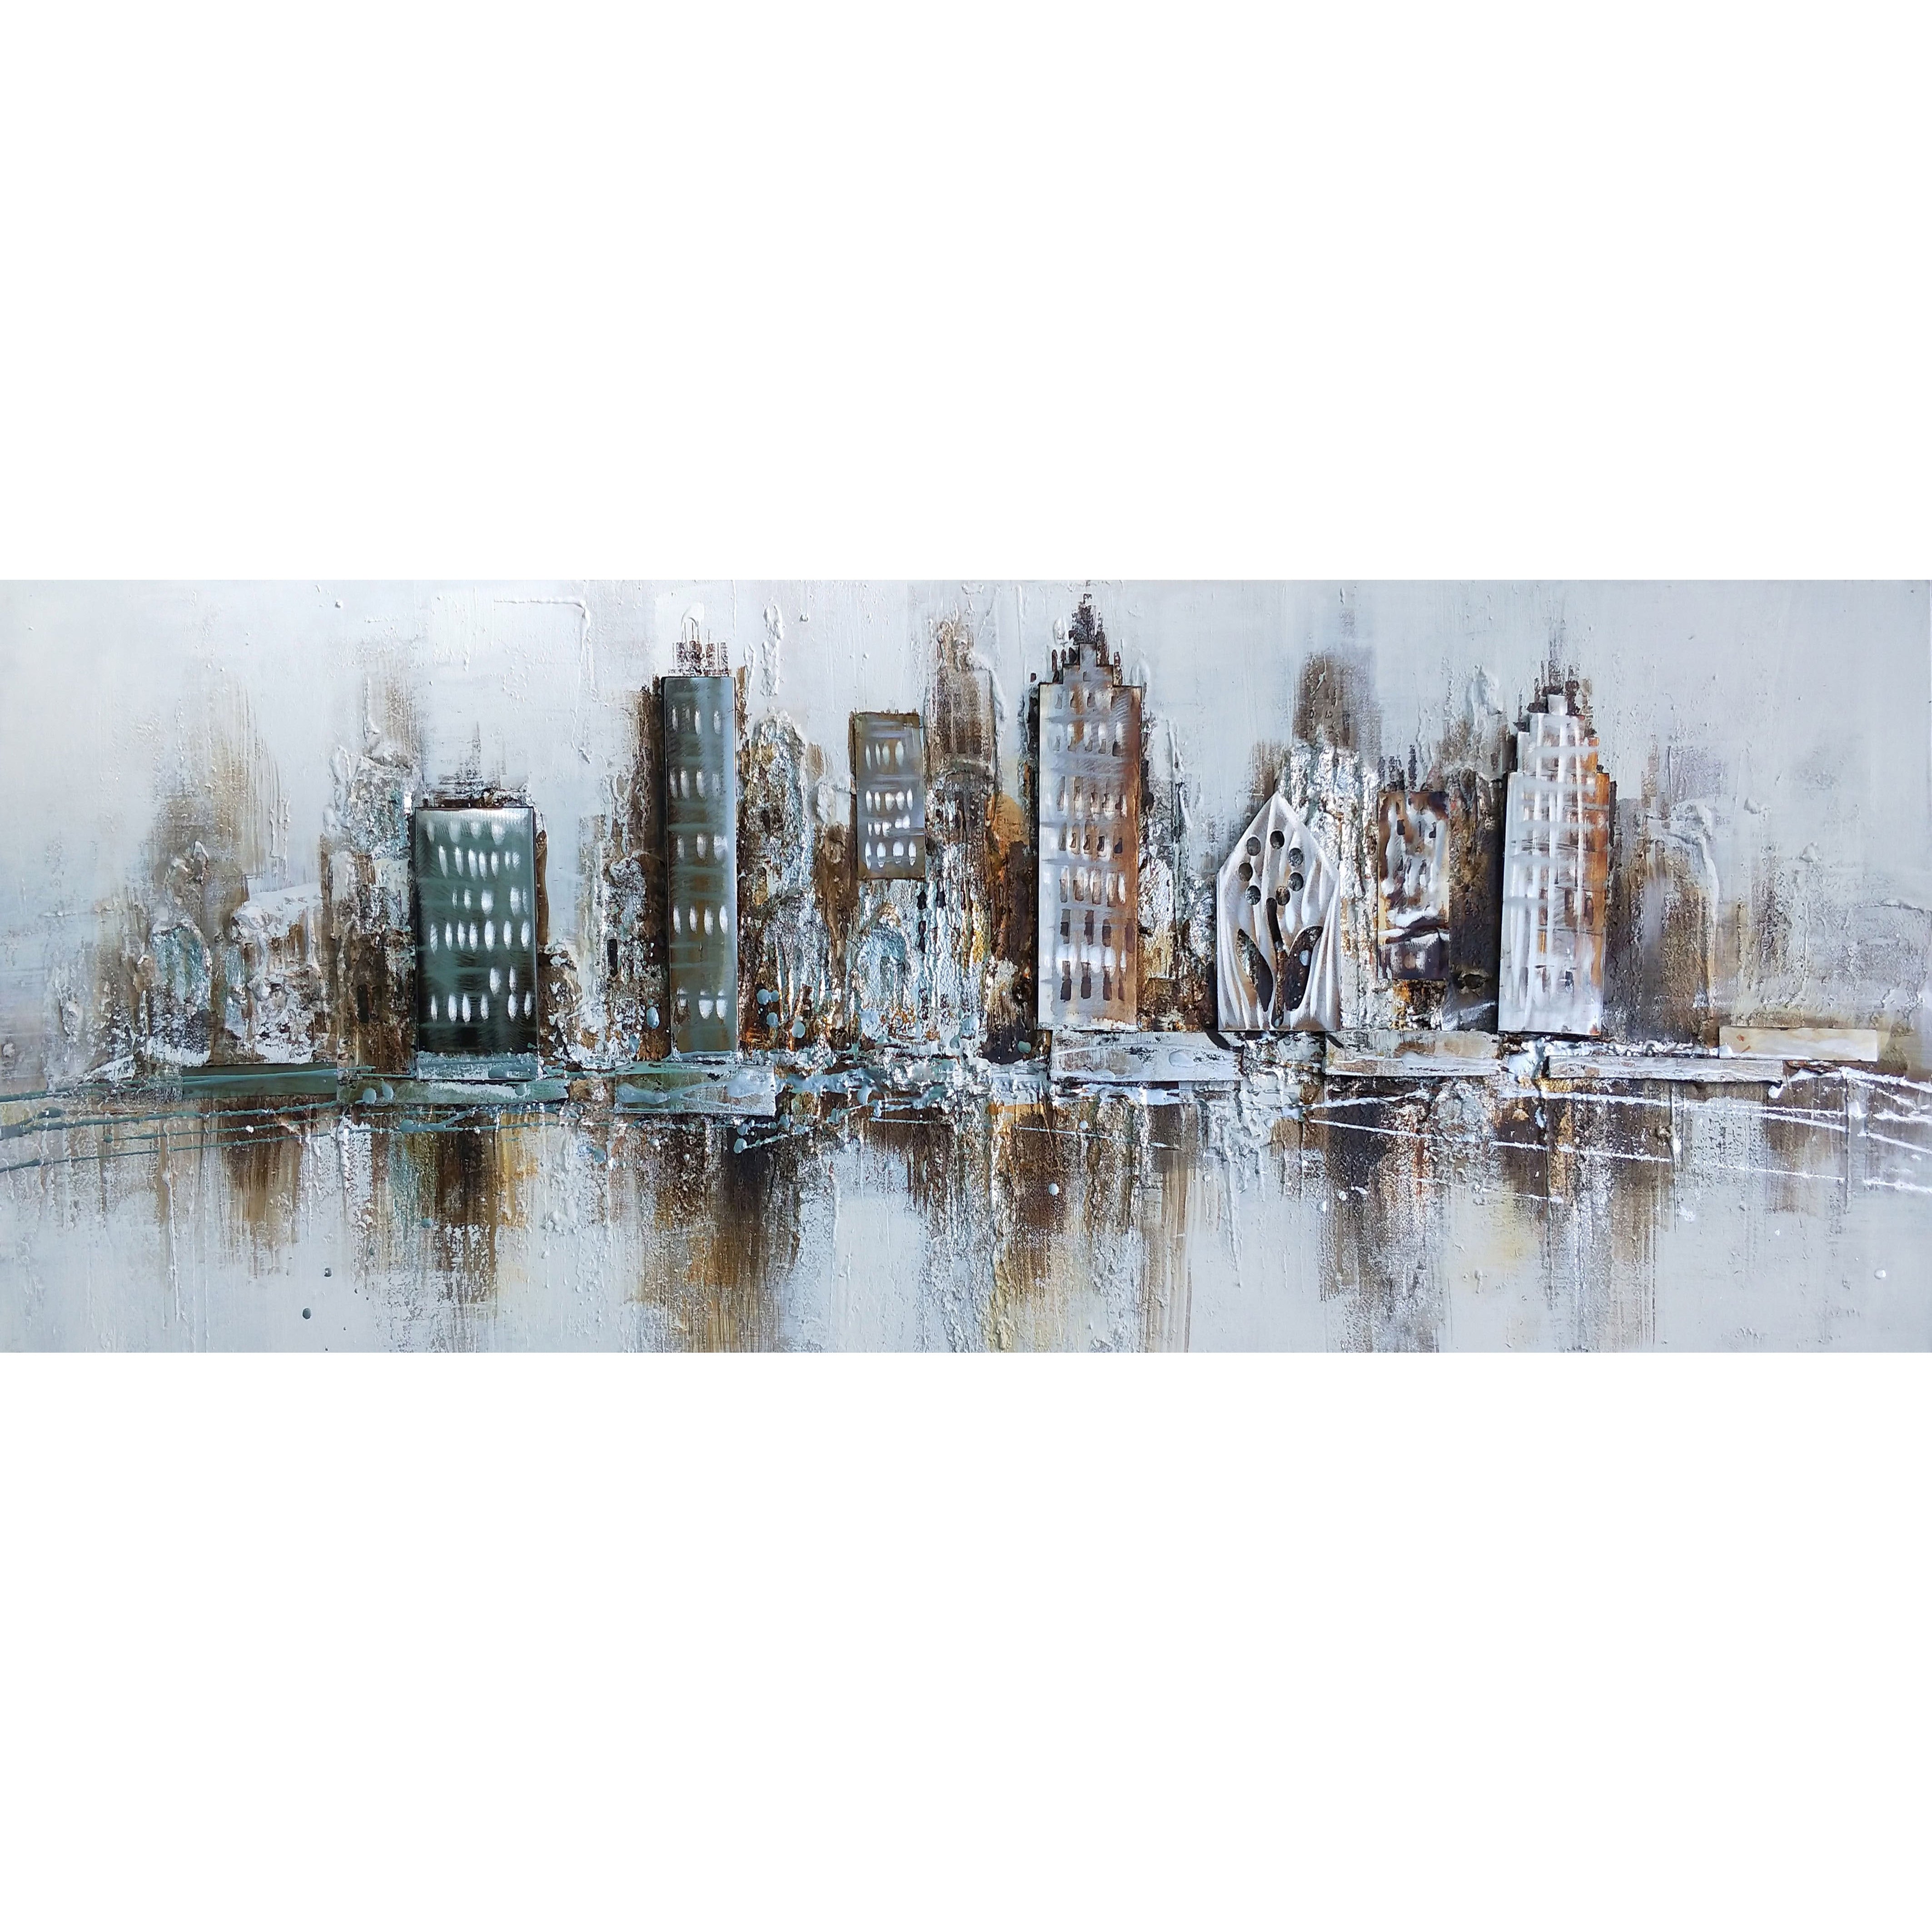 Oil painting | 60x150 cm | Painting | p1221